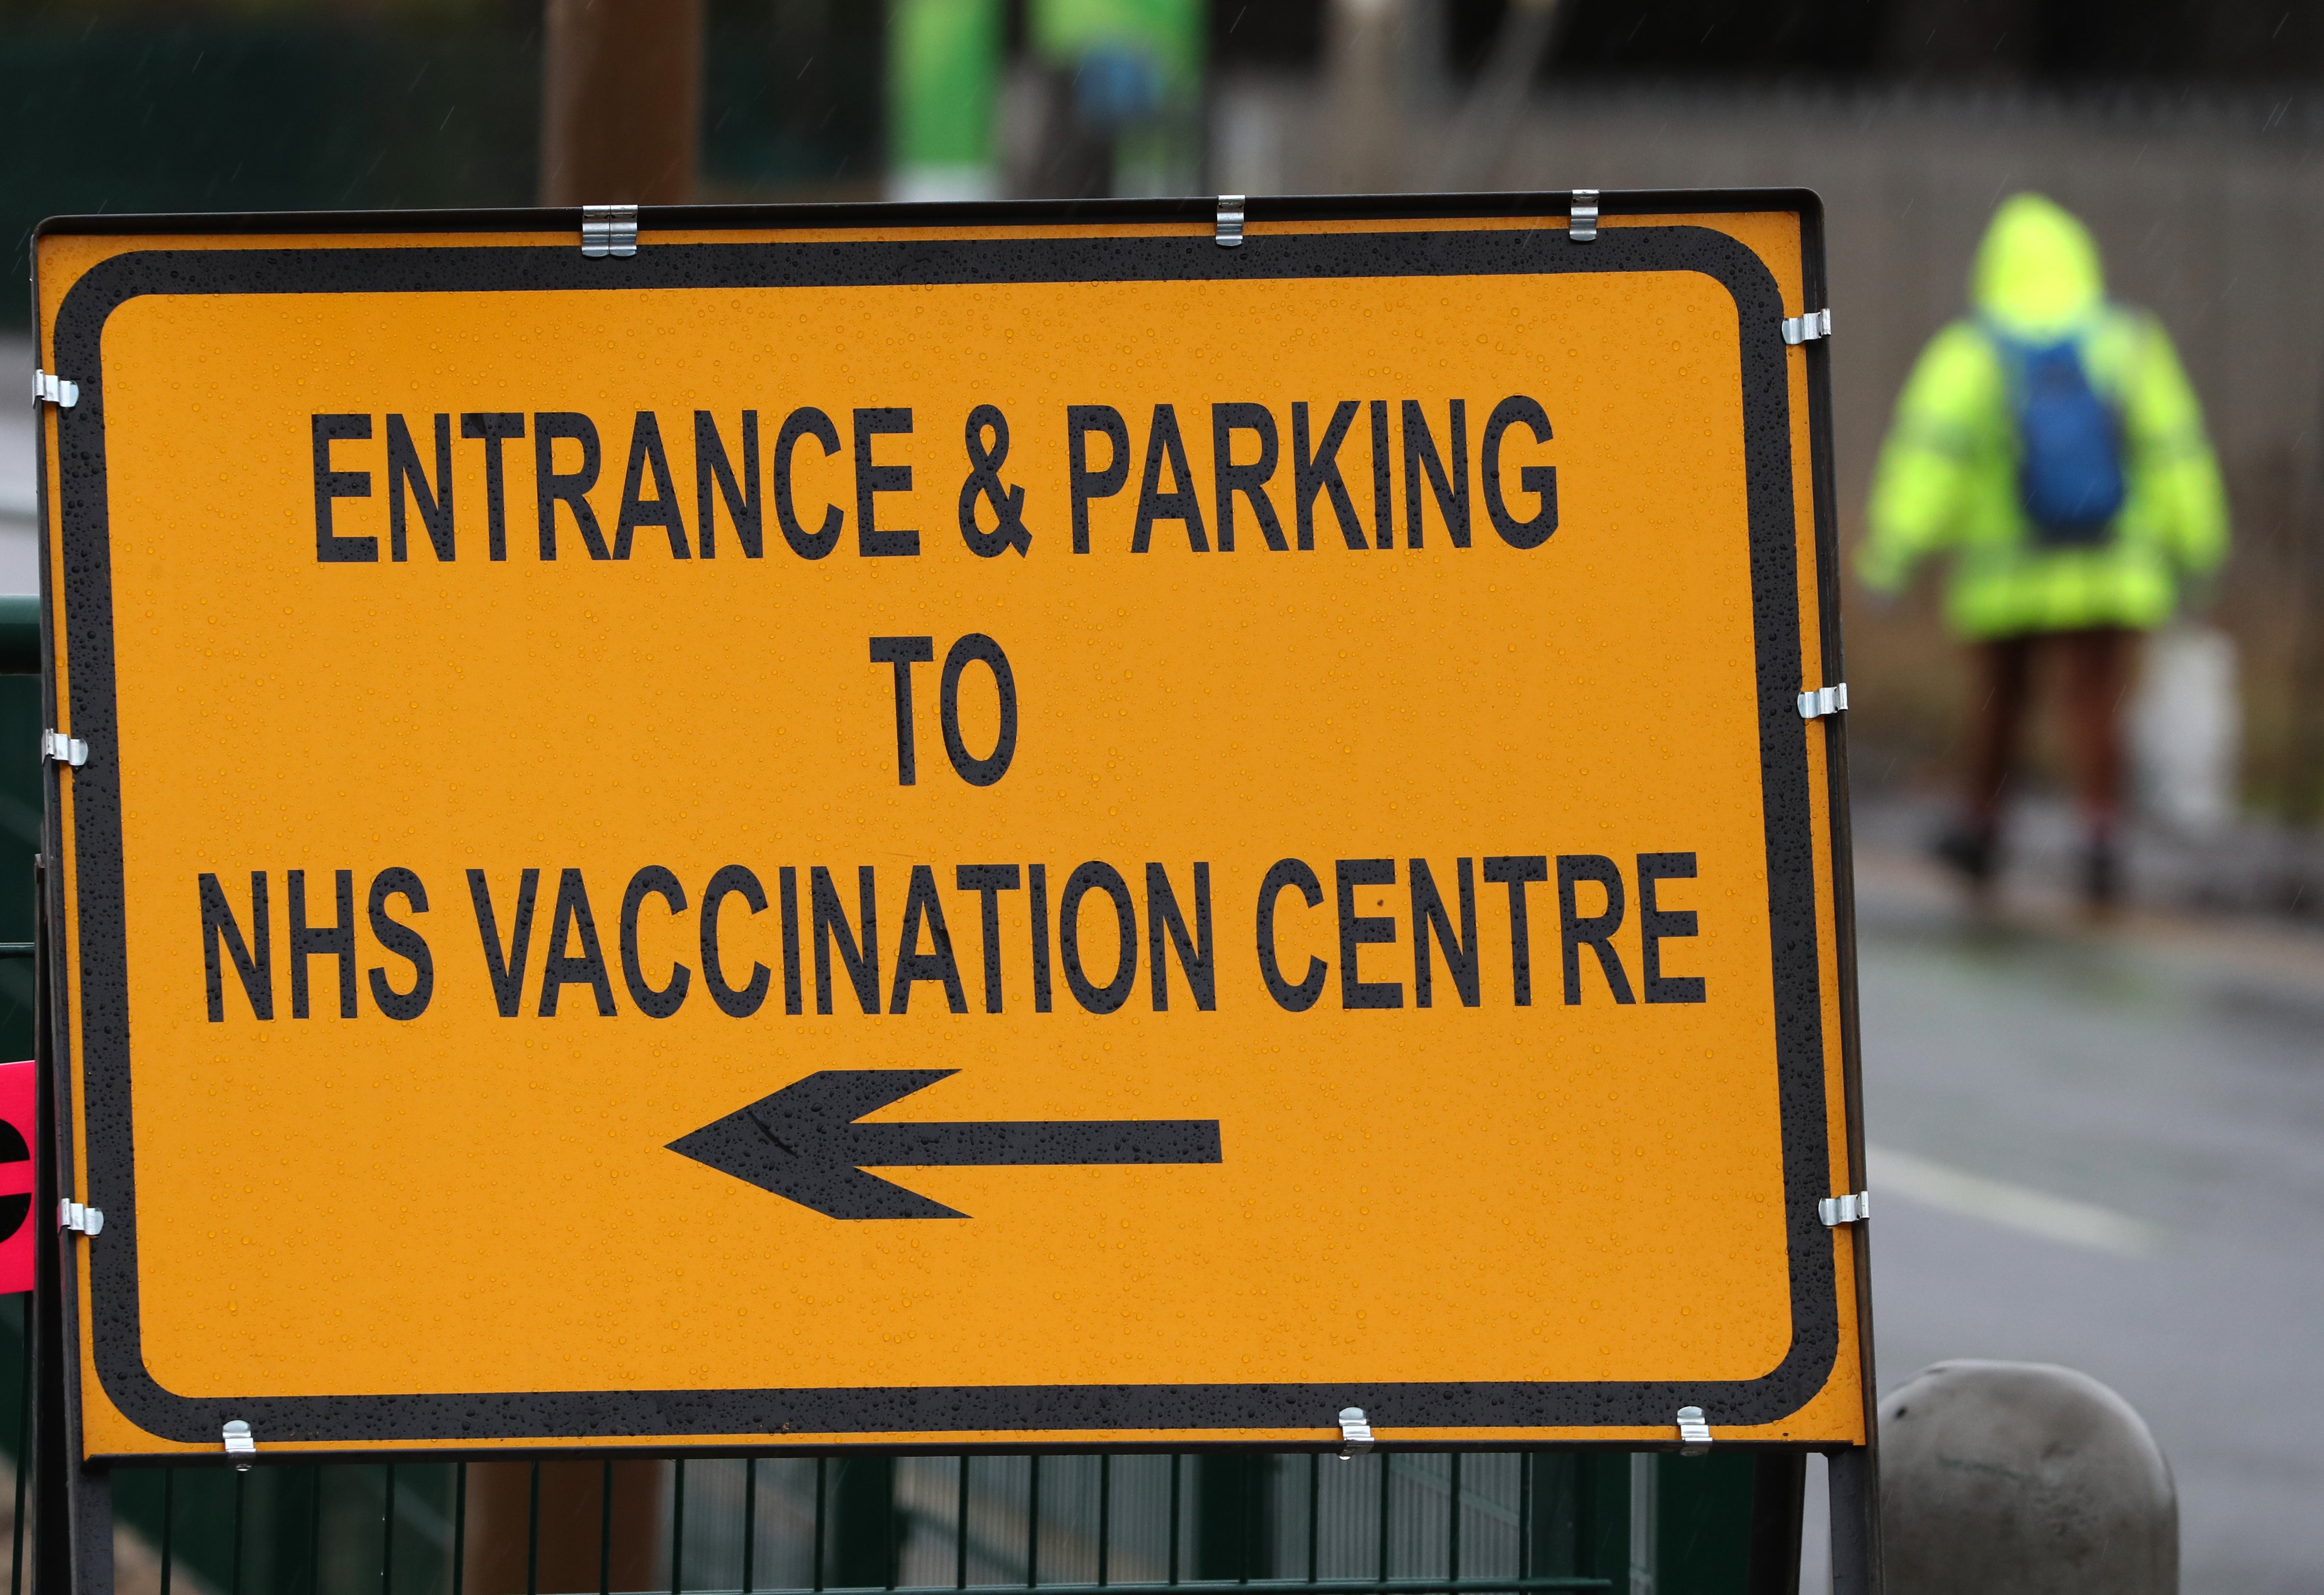 Nicola Sturgeon said it would make sure that the vaccination centre in its current location continues (PA)